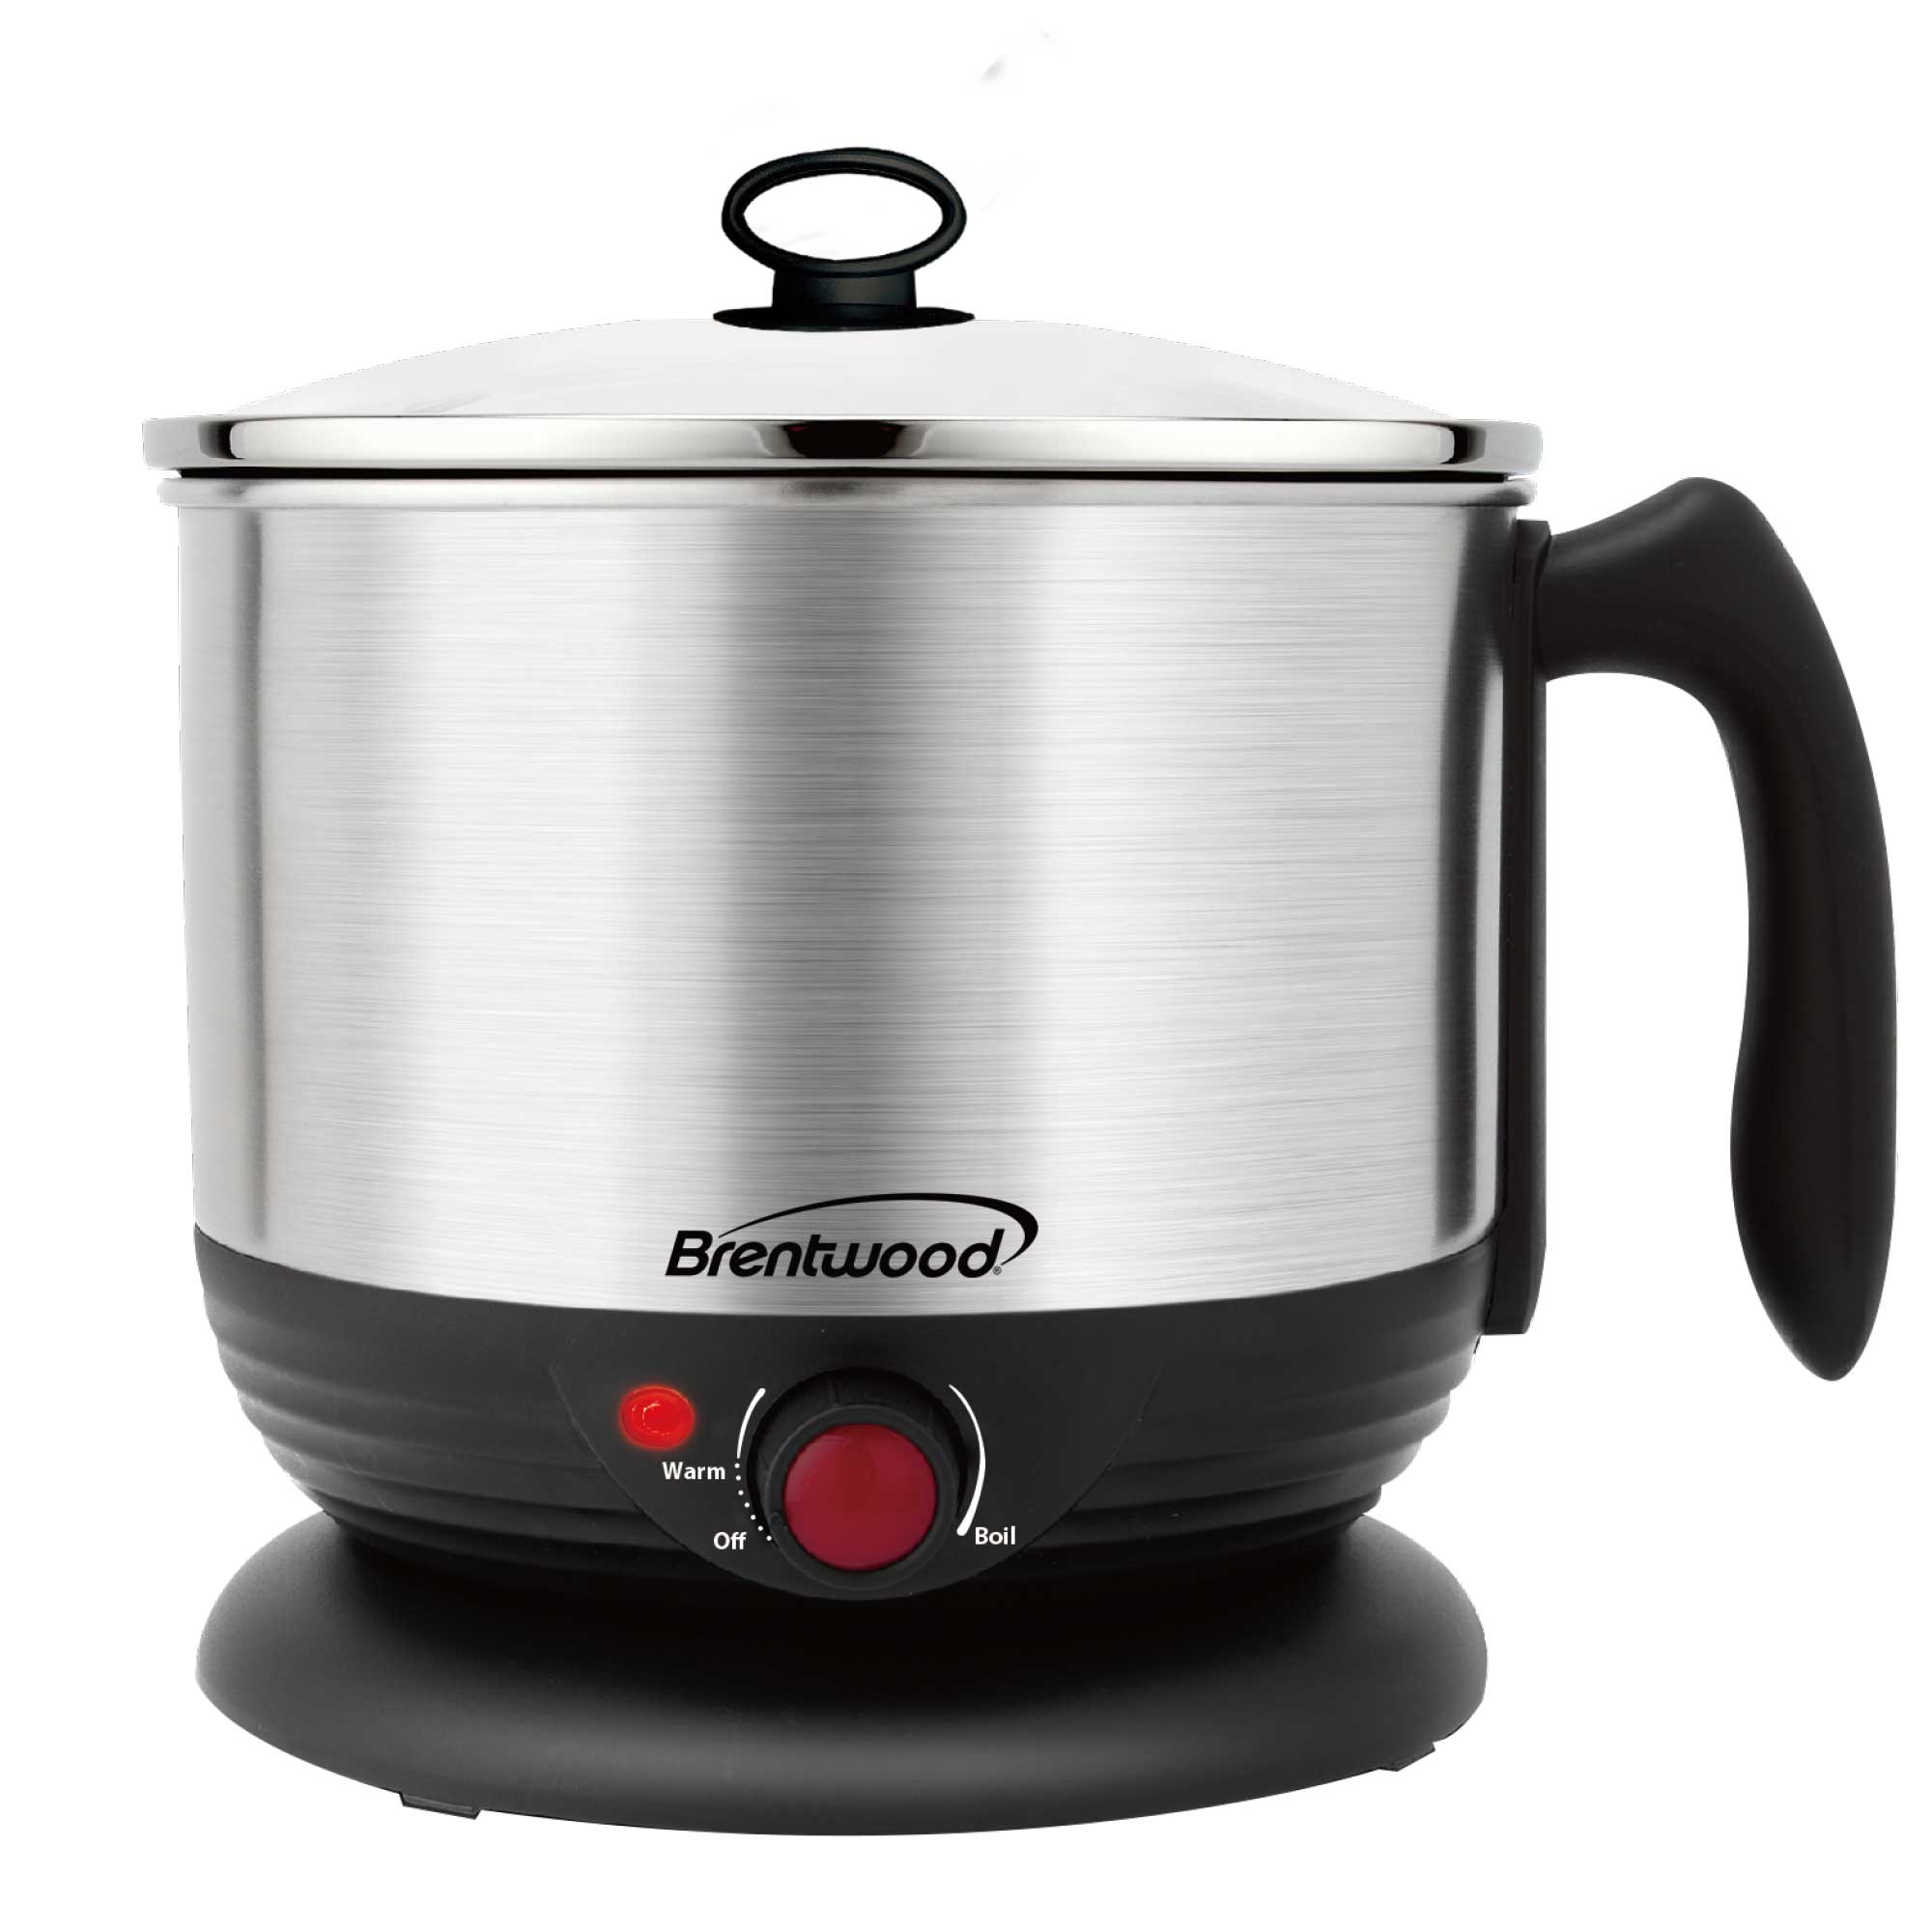 Brentwood Appliances 1.8 Quarts Stainless Steel Electric Tea